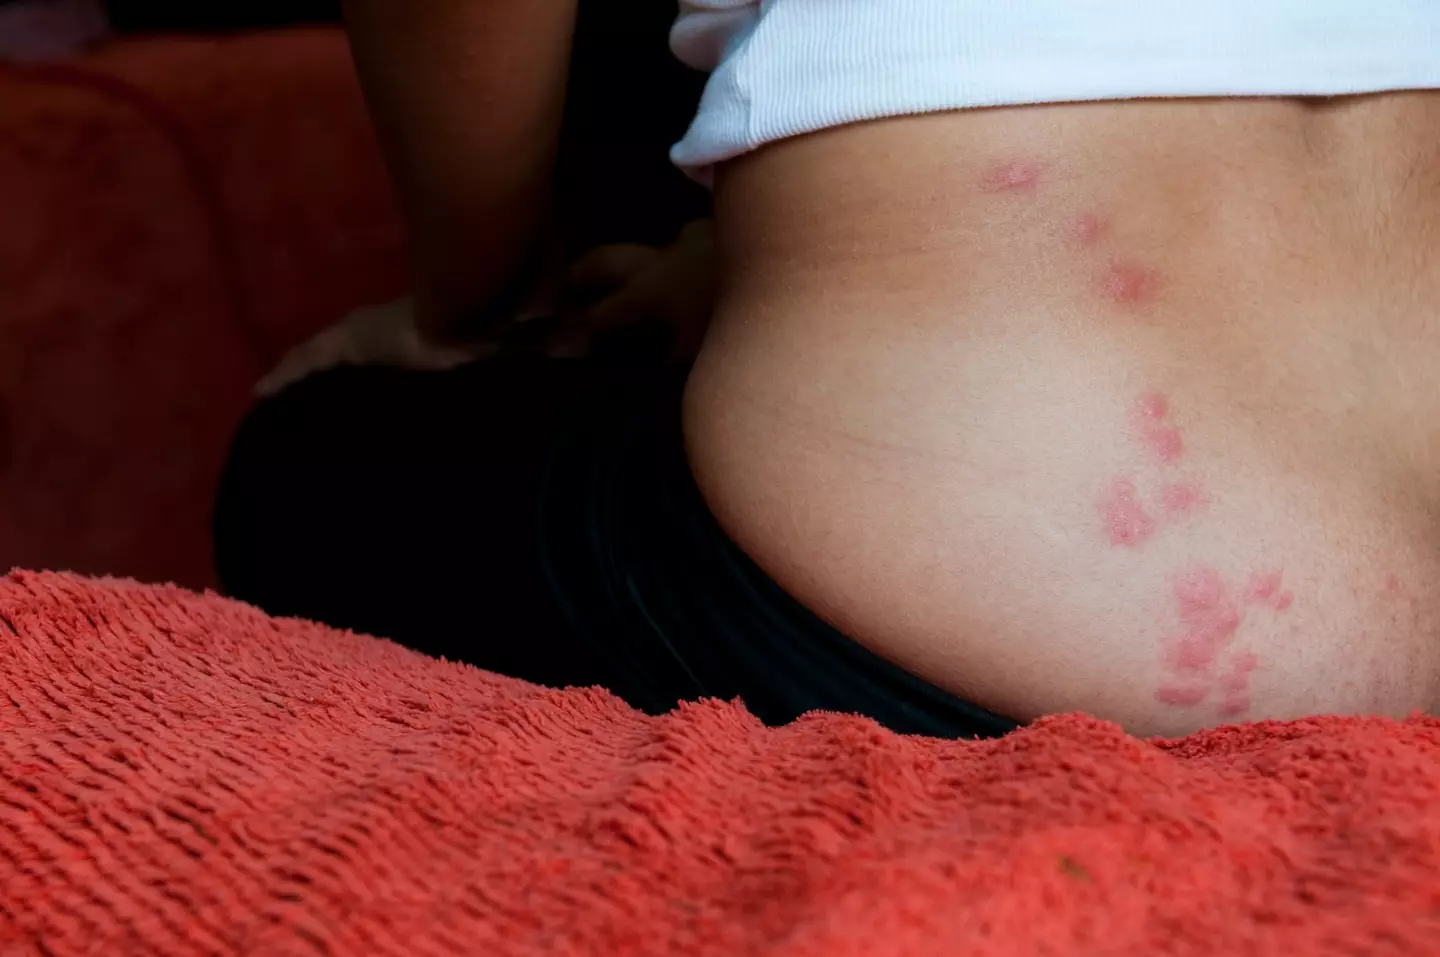 Bedbug bites can cause irritation and increase risk of skin infections.